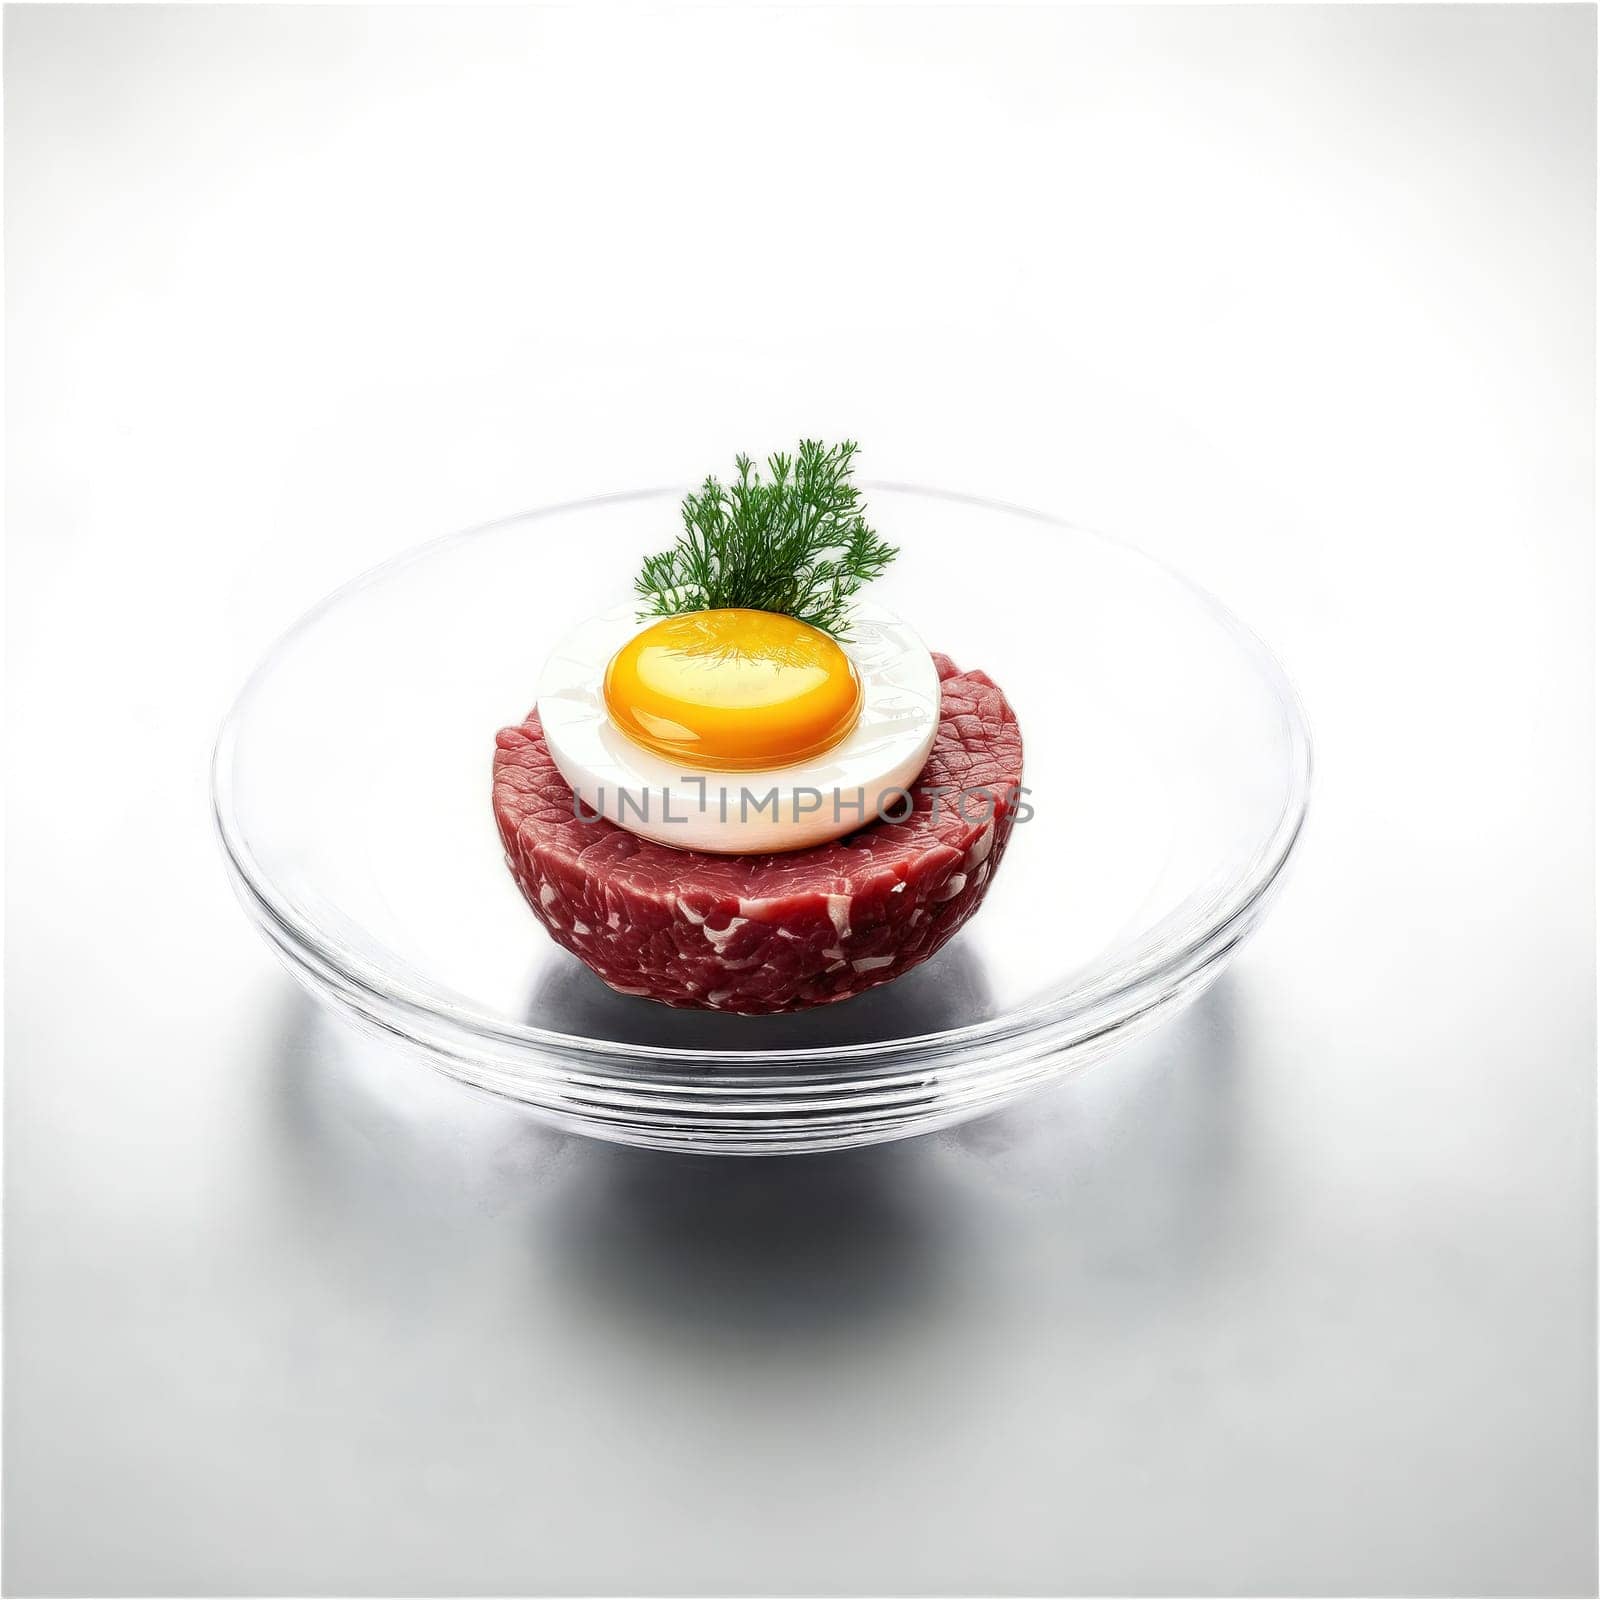 Steak tartare quail egg hand chopped raw beef mound golden yolk nestled in glass bowl by panophotograph